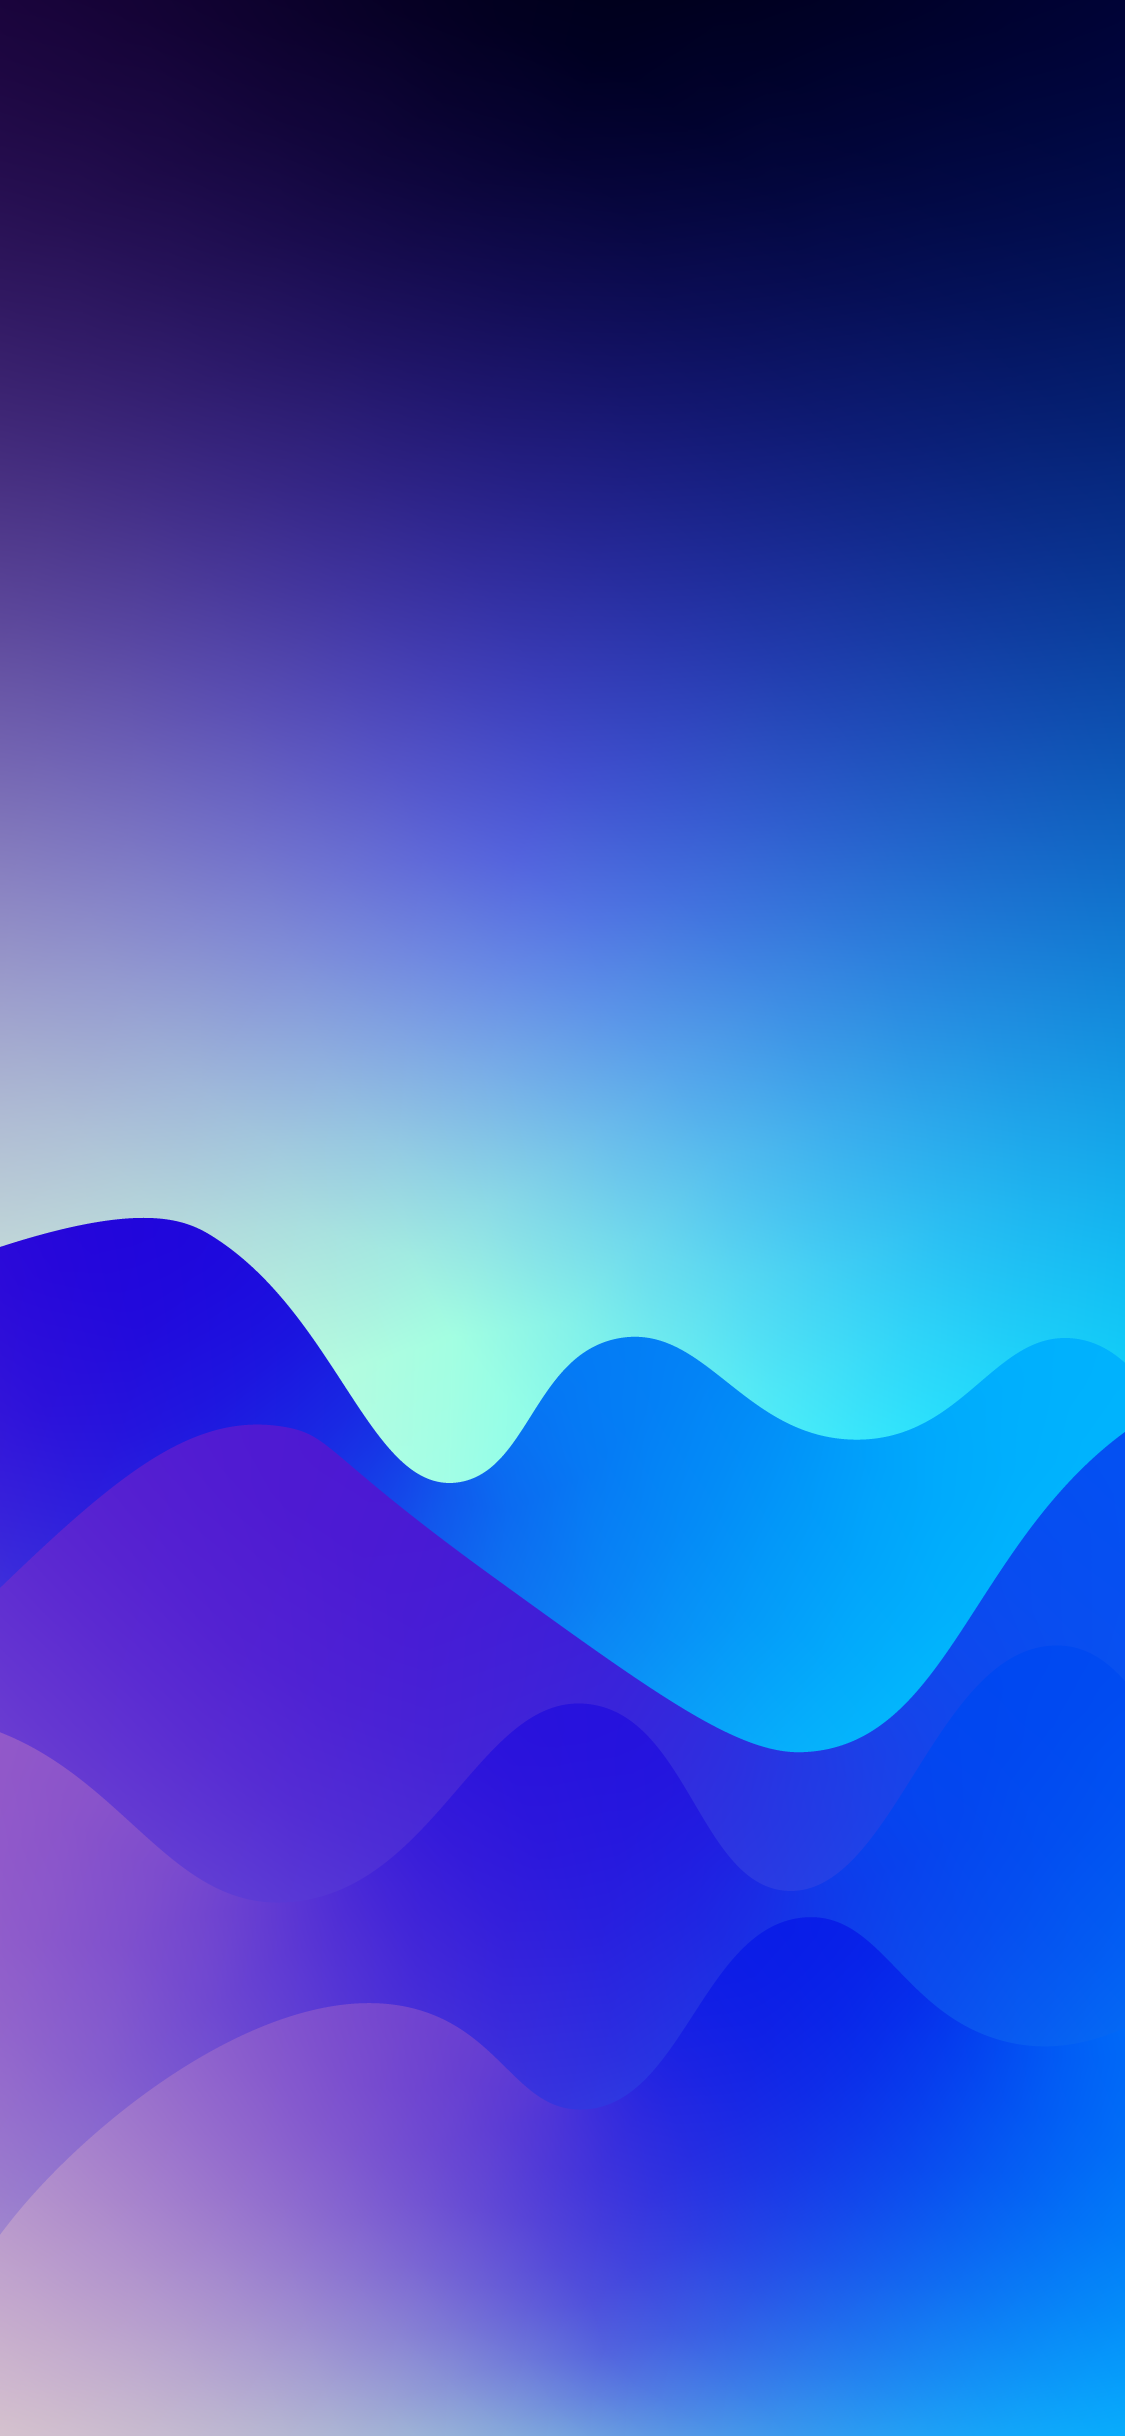 IPHONE WALLPAPER 4K AND CLEAN WAVES. Heroscreen. High Quality Background Wallpaper